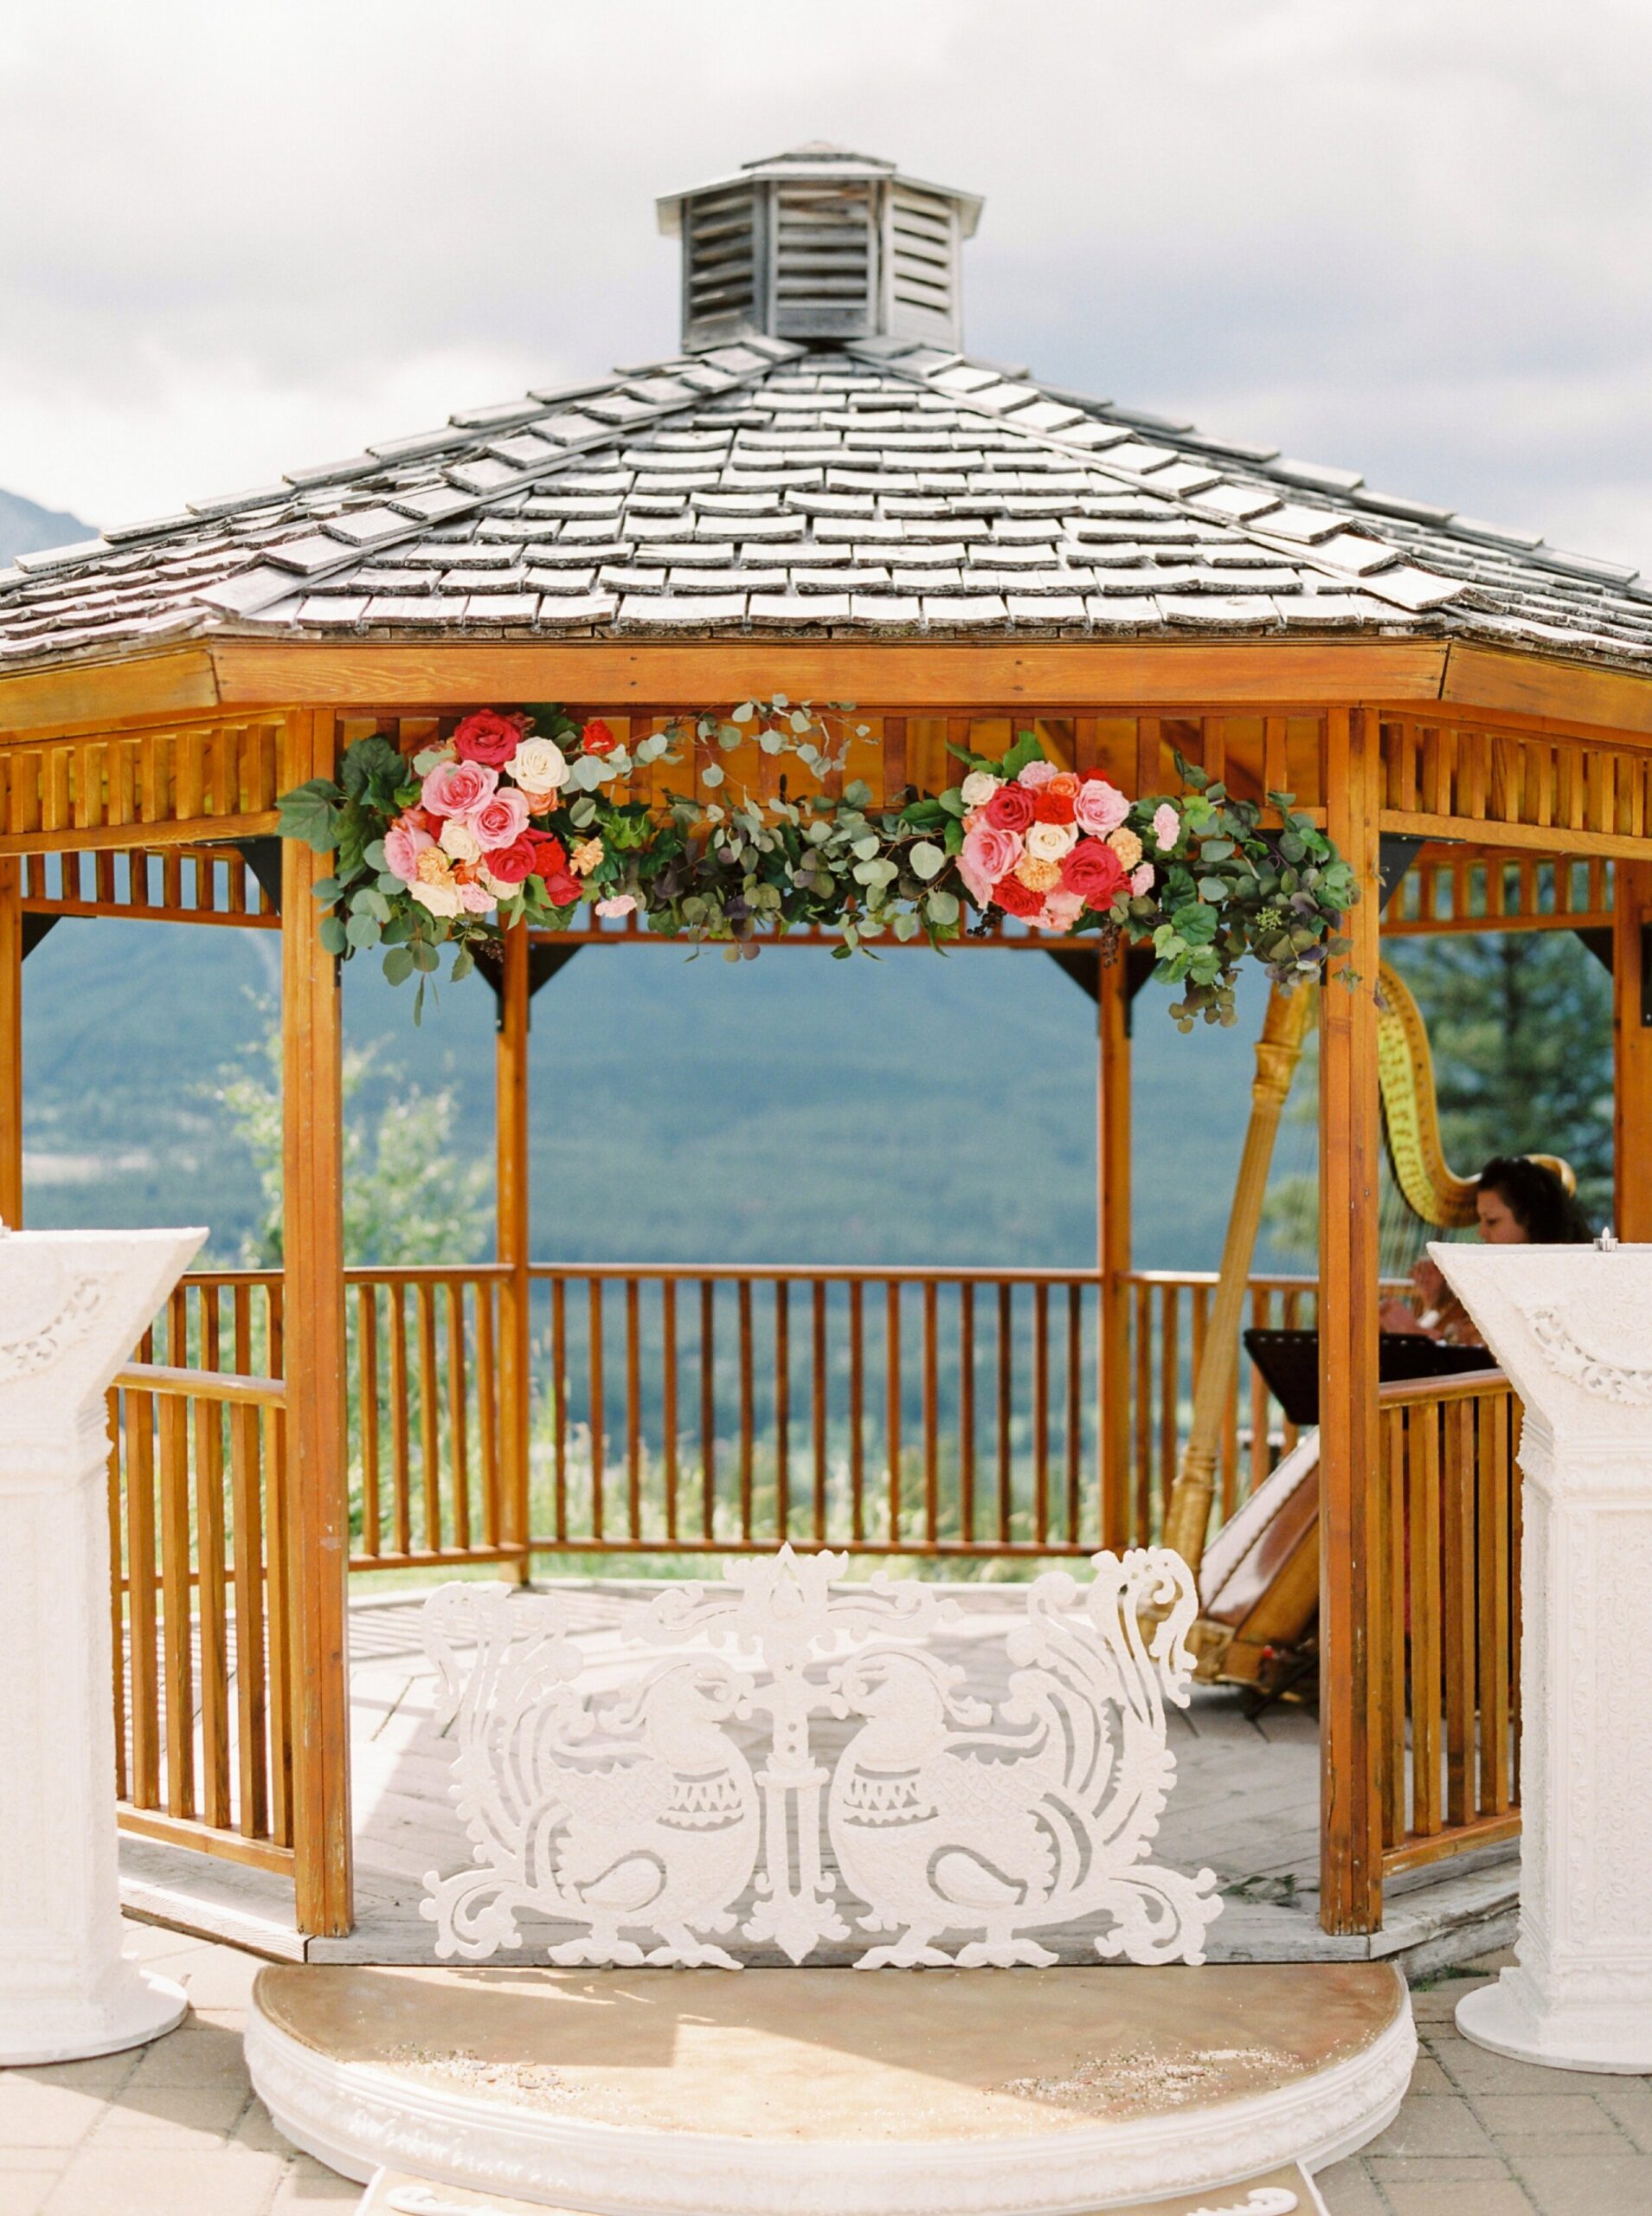 Srilankan Fusion wedding at Silvertip in Canmore